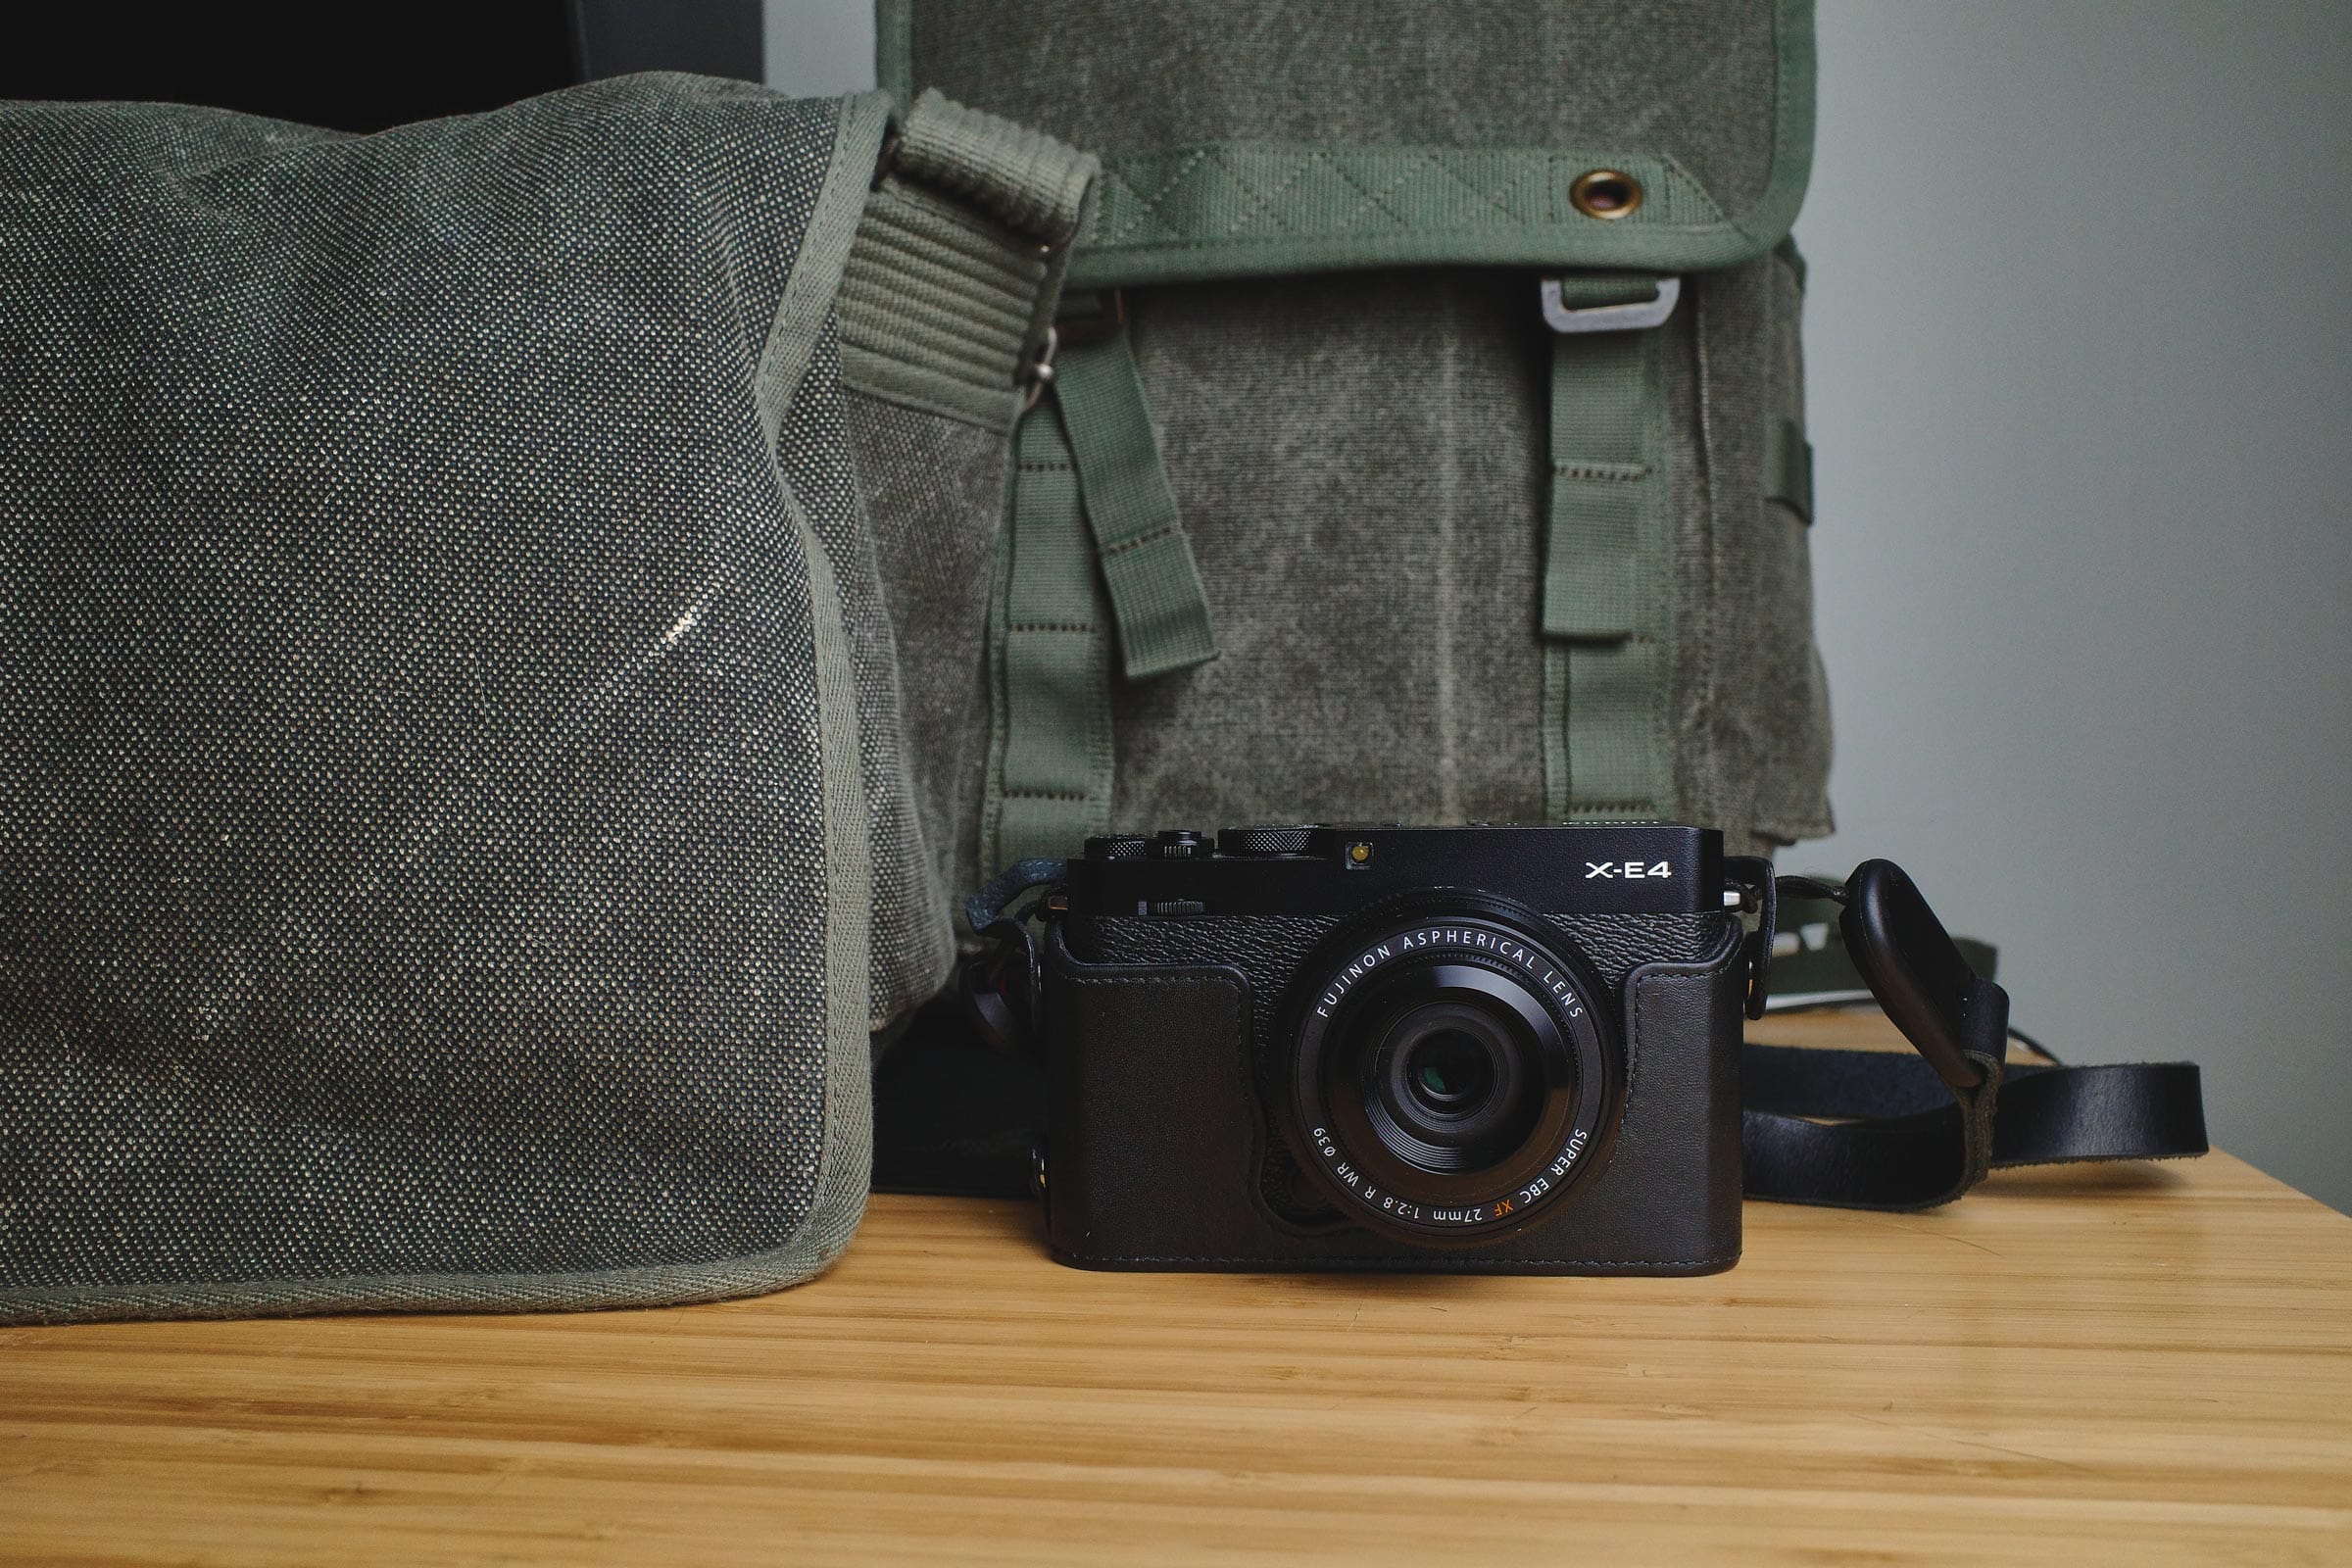 Photo of a simple street photography gear setup with a camera, lens, strap, and camera bags